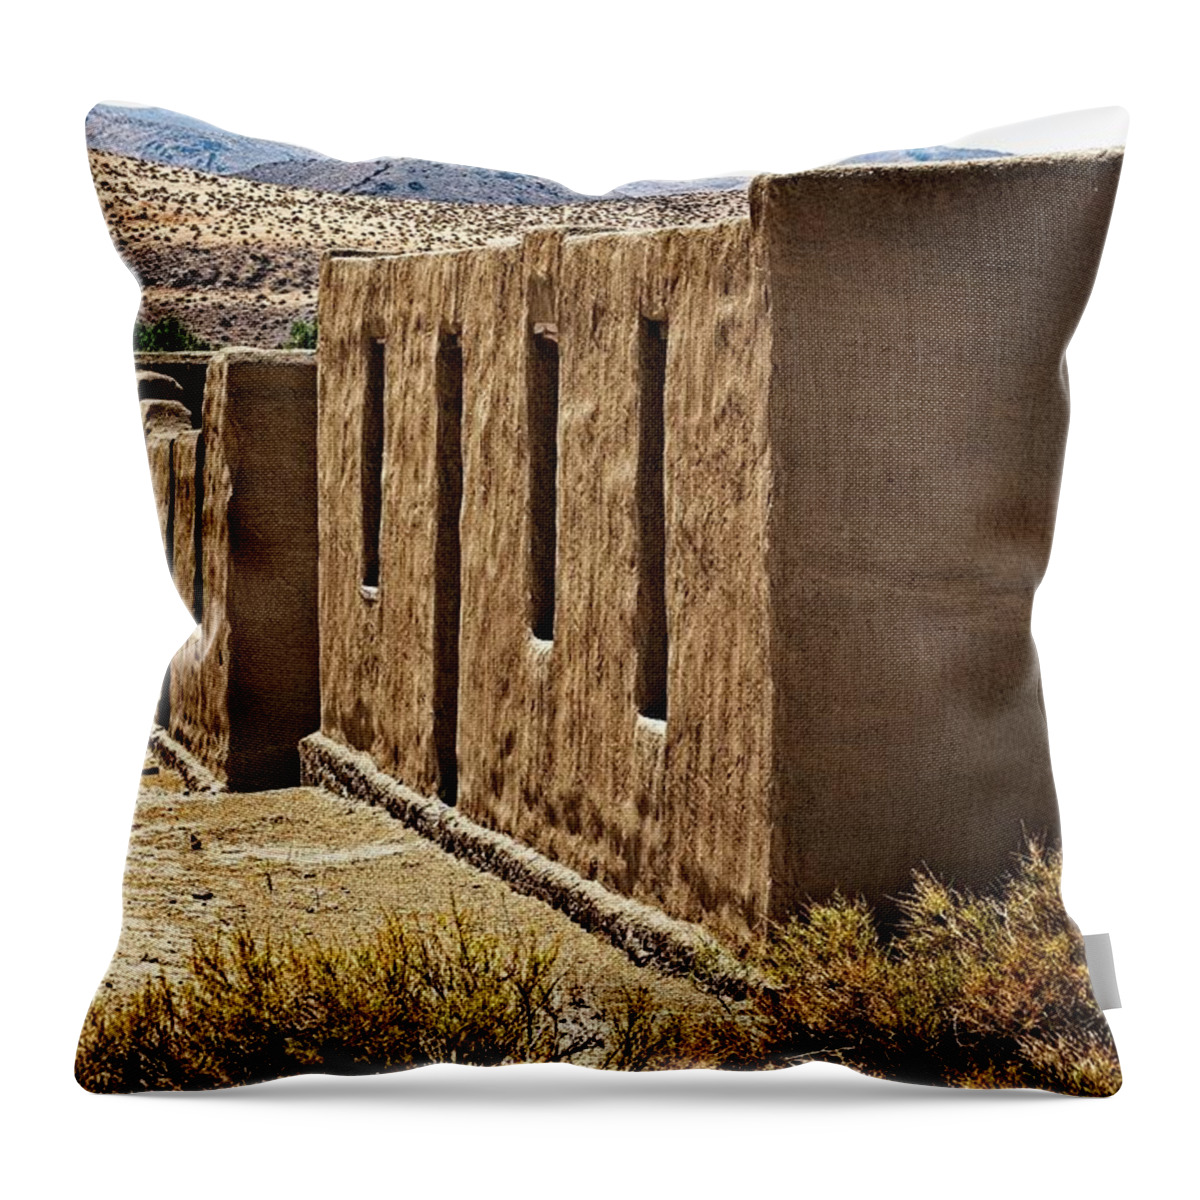 Abandoned Throw Pillow featuring the photograph Fort Churchill Buildings by David Desautel